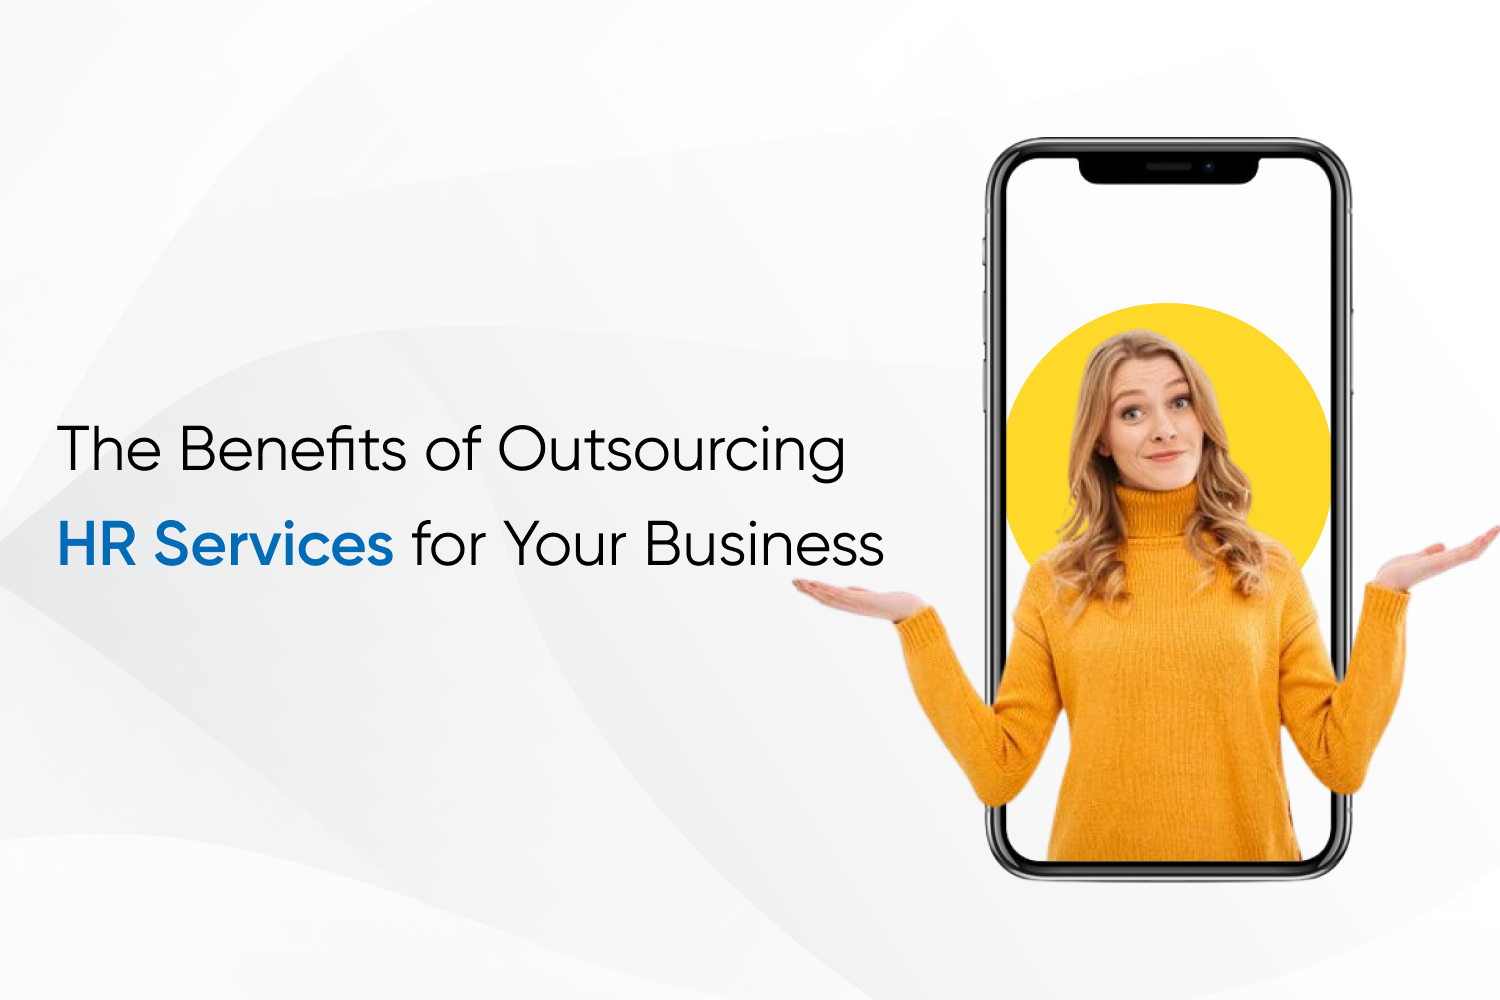 The Benefits of Outsourcing HR Services for Your Business